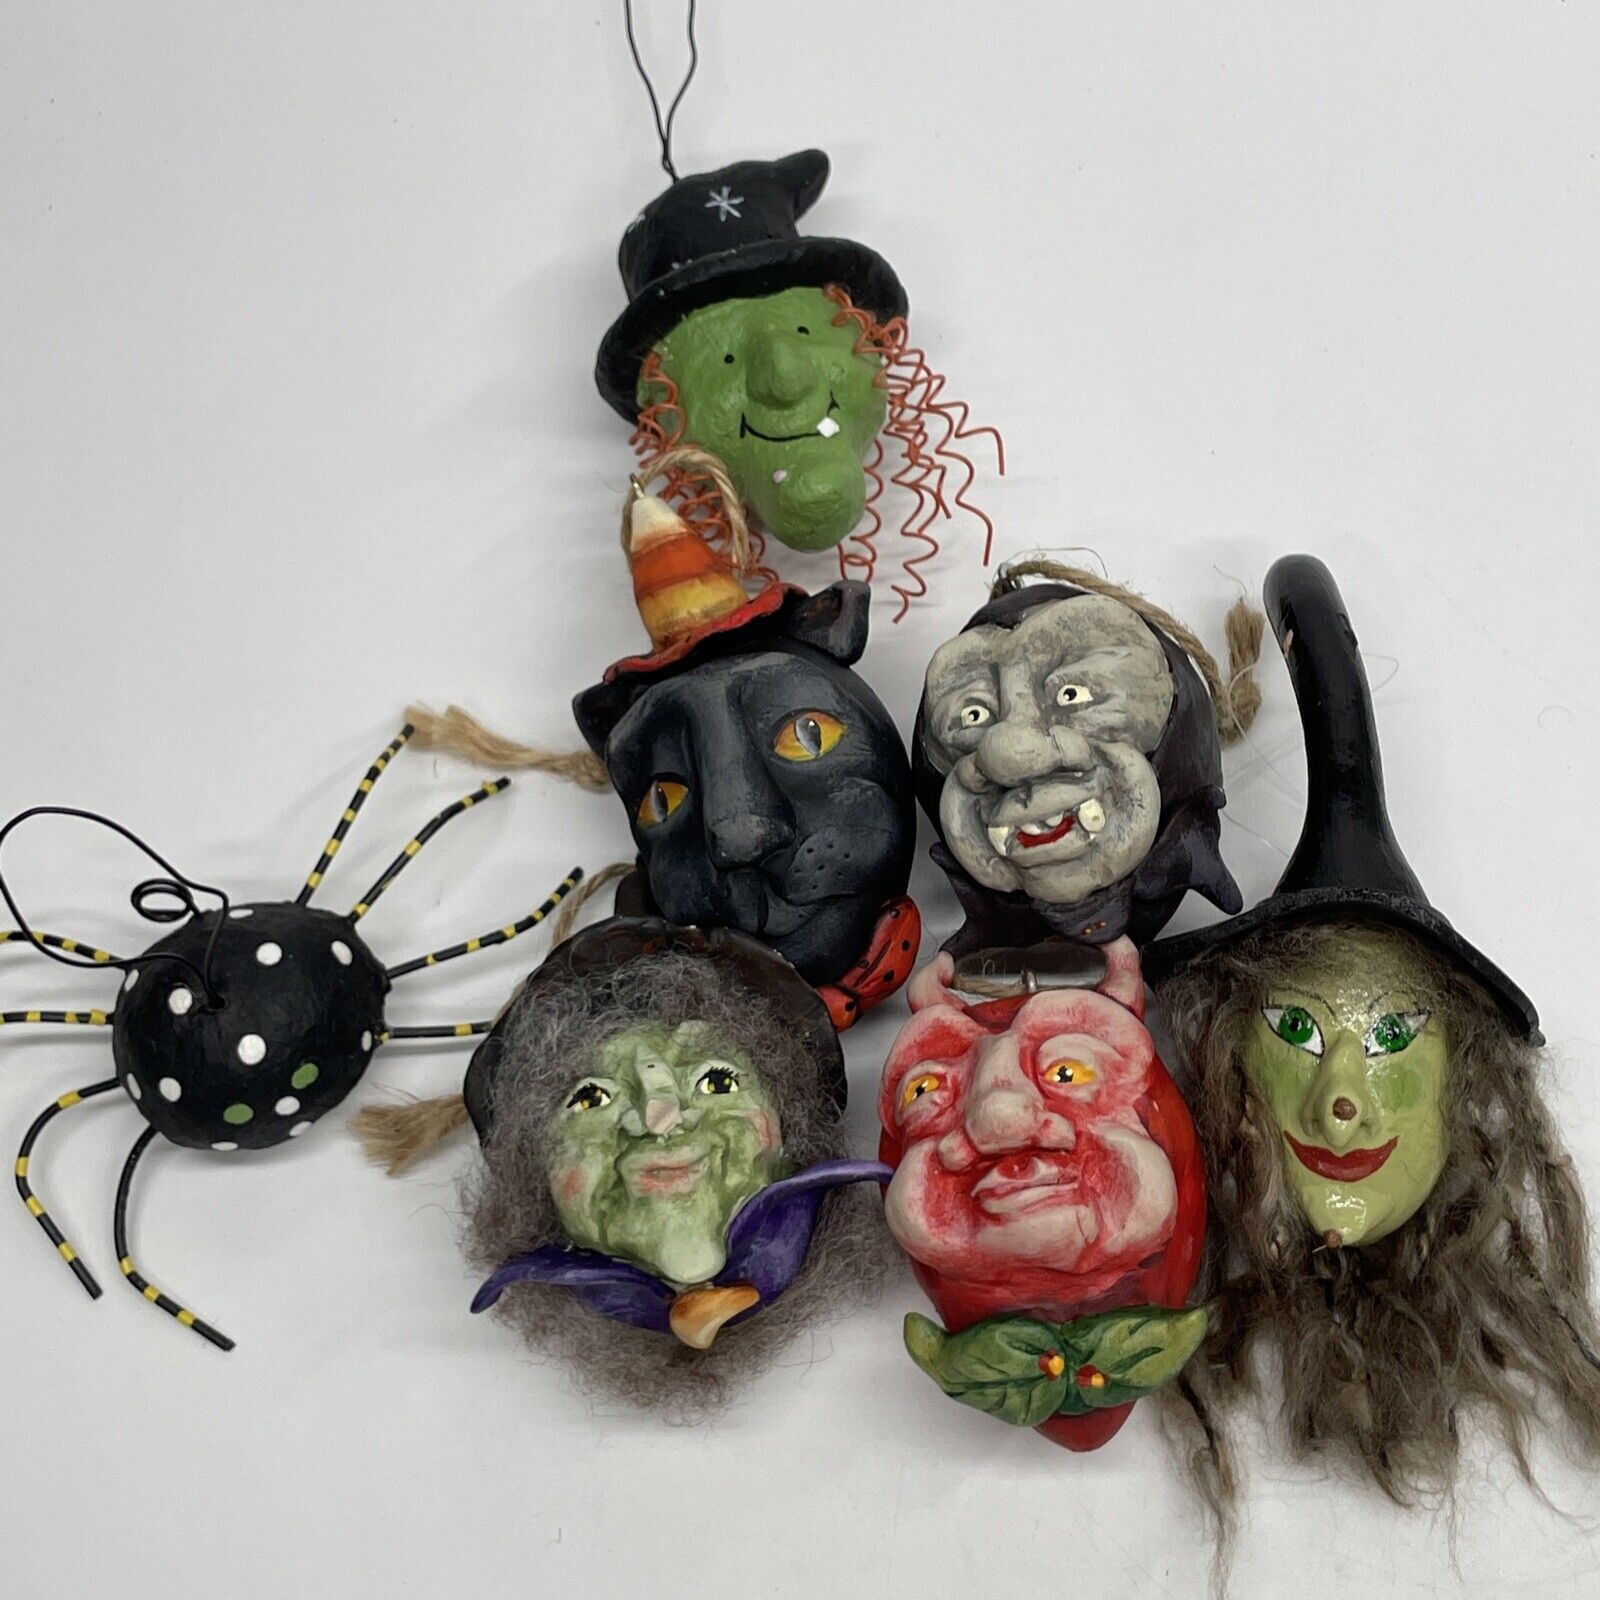 7 Vintage Sculpted Halloween Gourds Ornaments Hand Painted Signed Dottie Kuhl